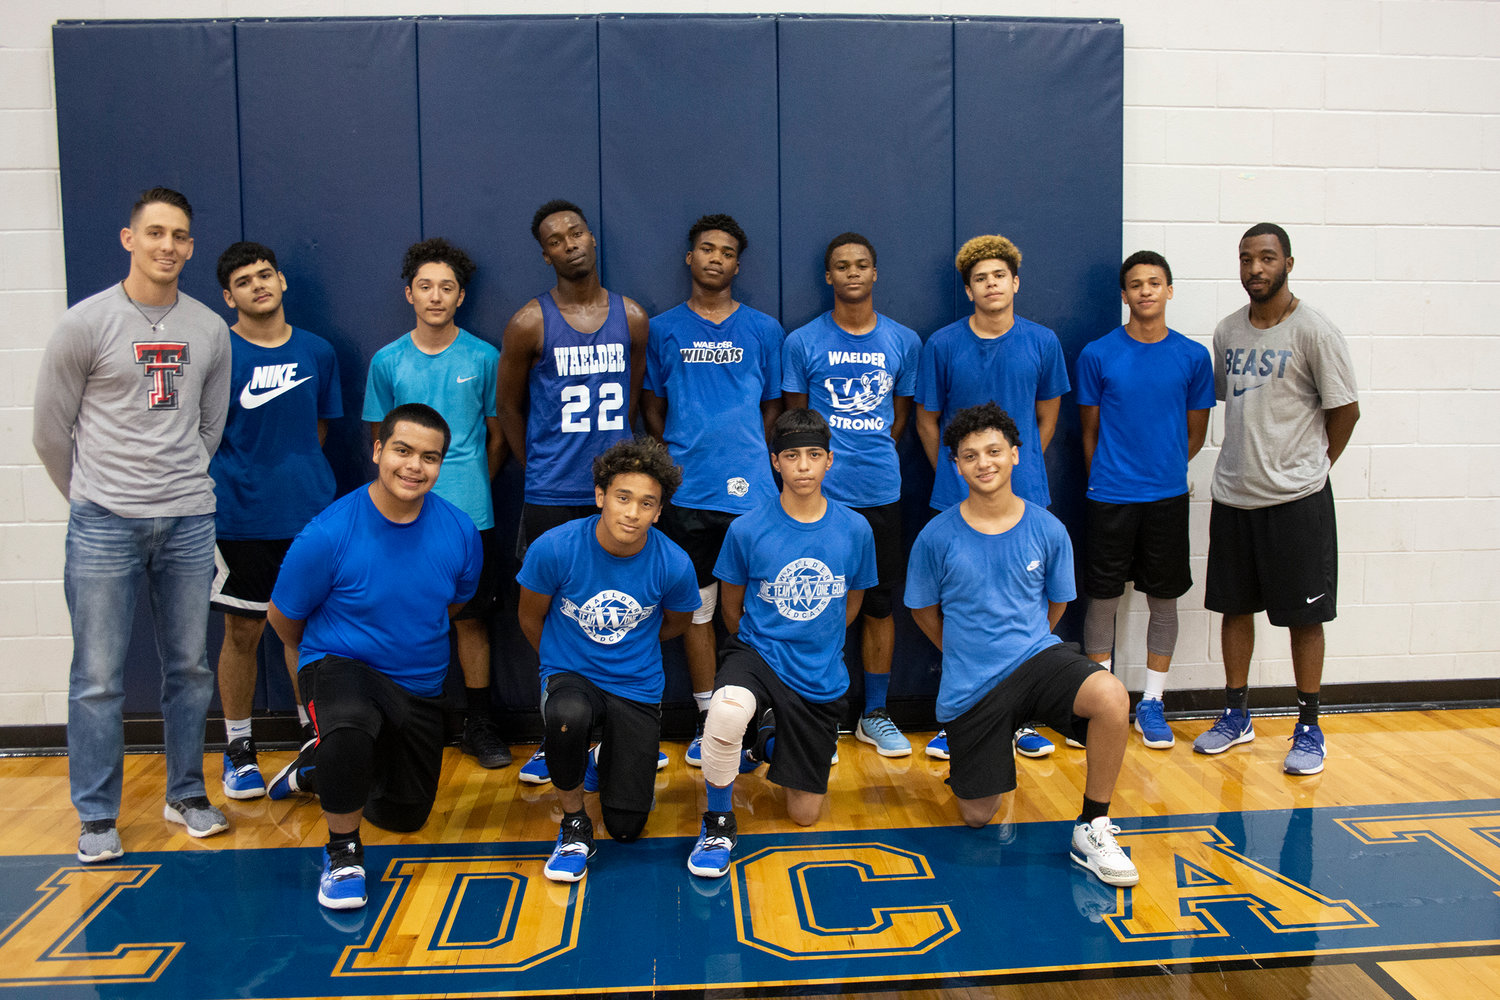 The Waelder Wildcats hosted a summer basketball league in July, playing against schools nearby like Schulenburg and (pictured) the Gonzales Apaches. The games gave the basketball programs the opportunity to put their athletes in competitive situations.